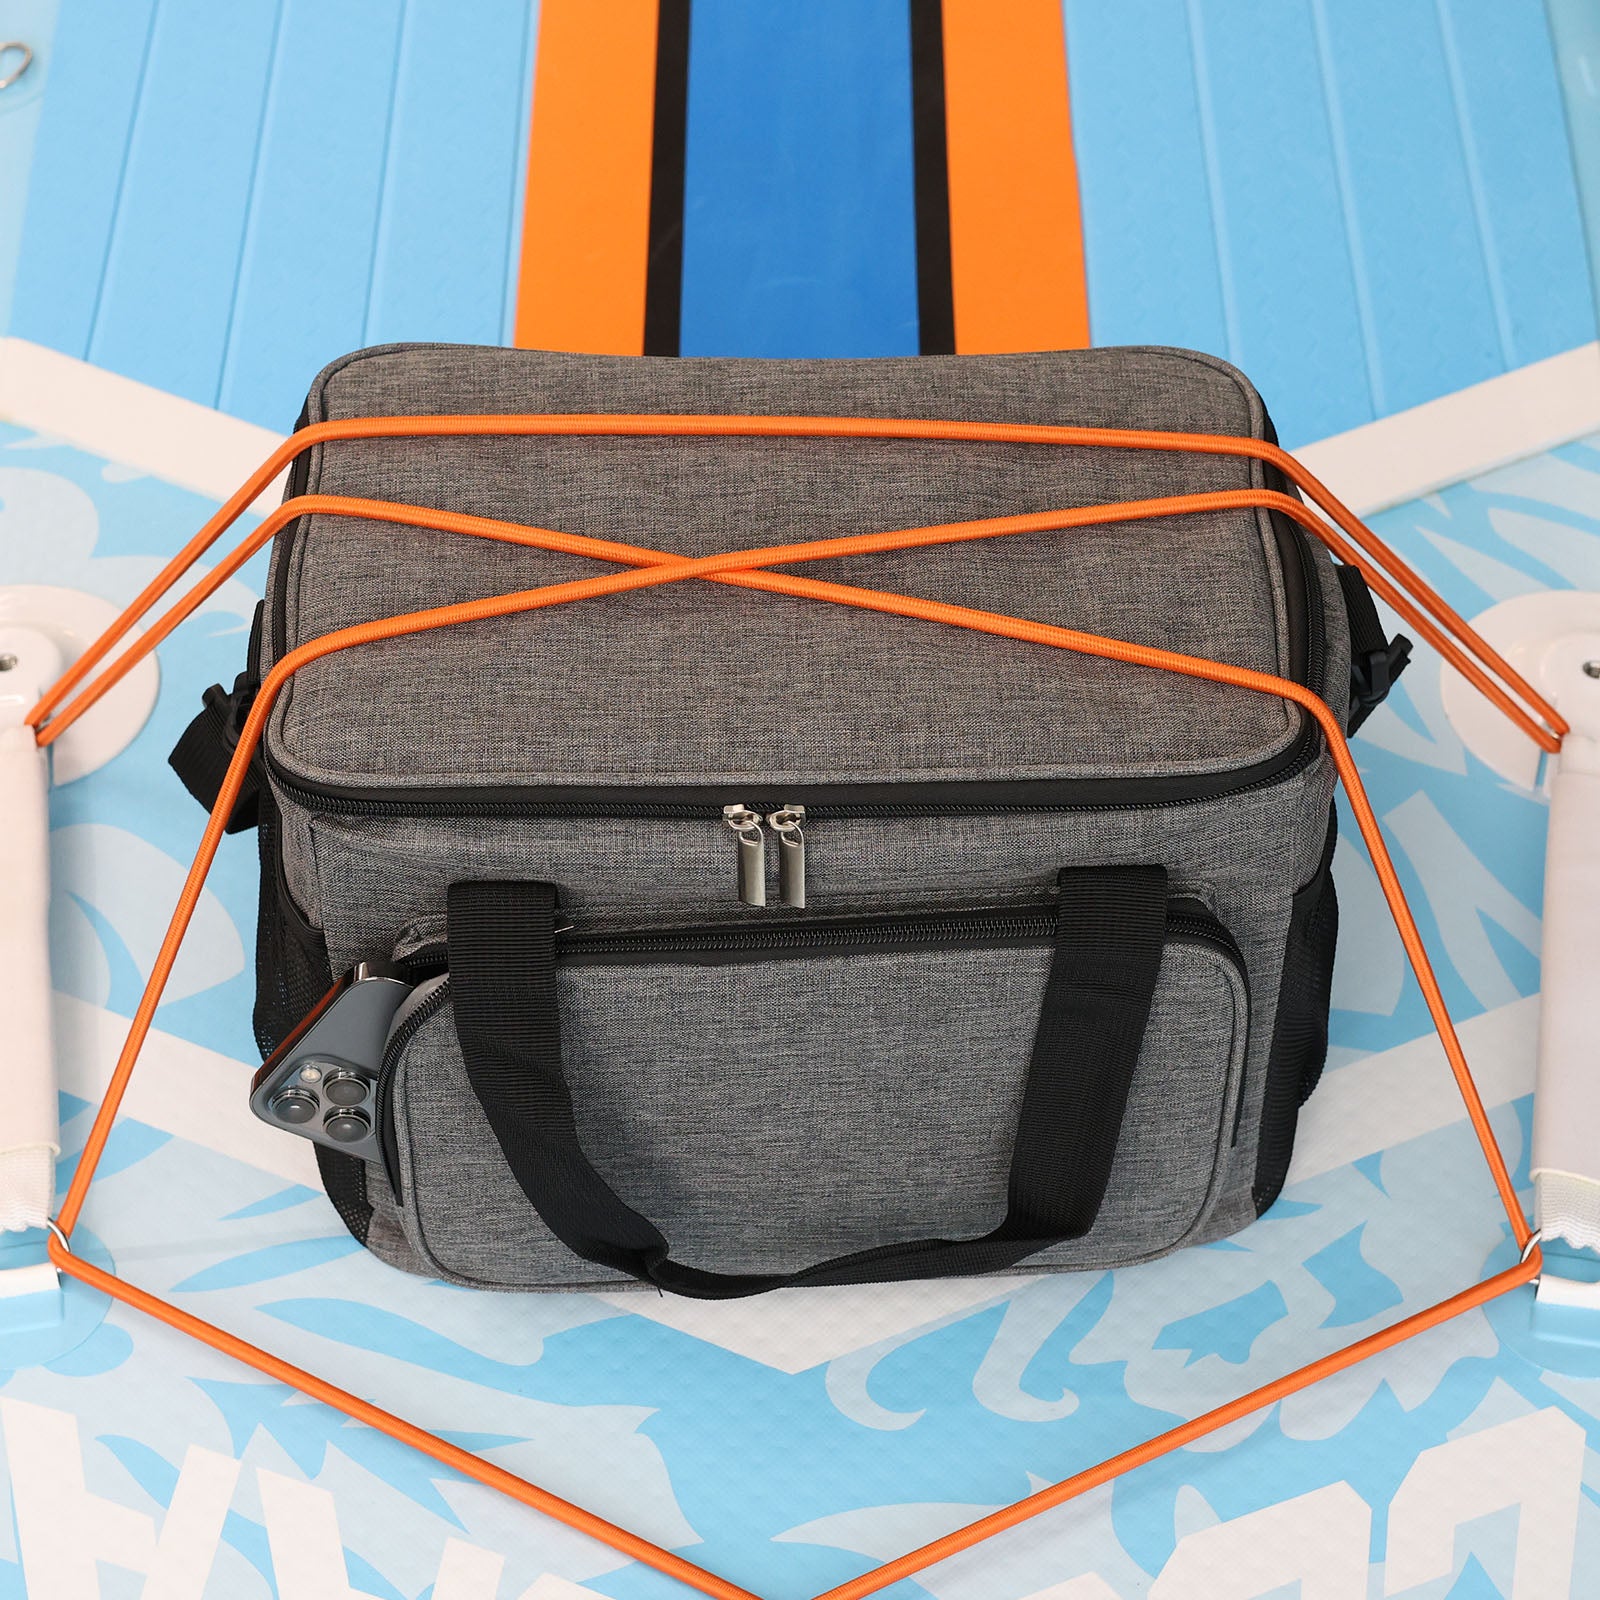 Organized Paddleboarding with Cooler & Deck Bag